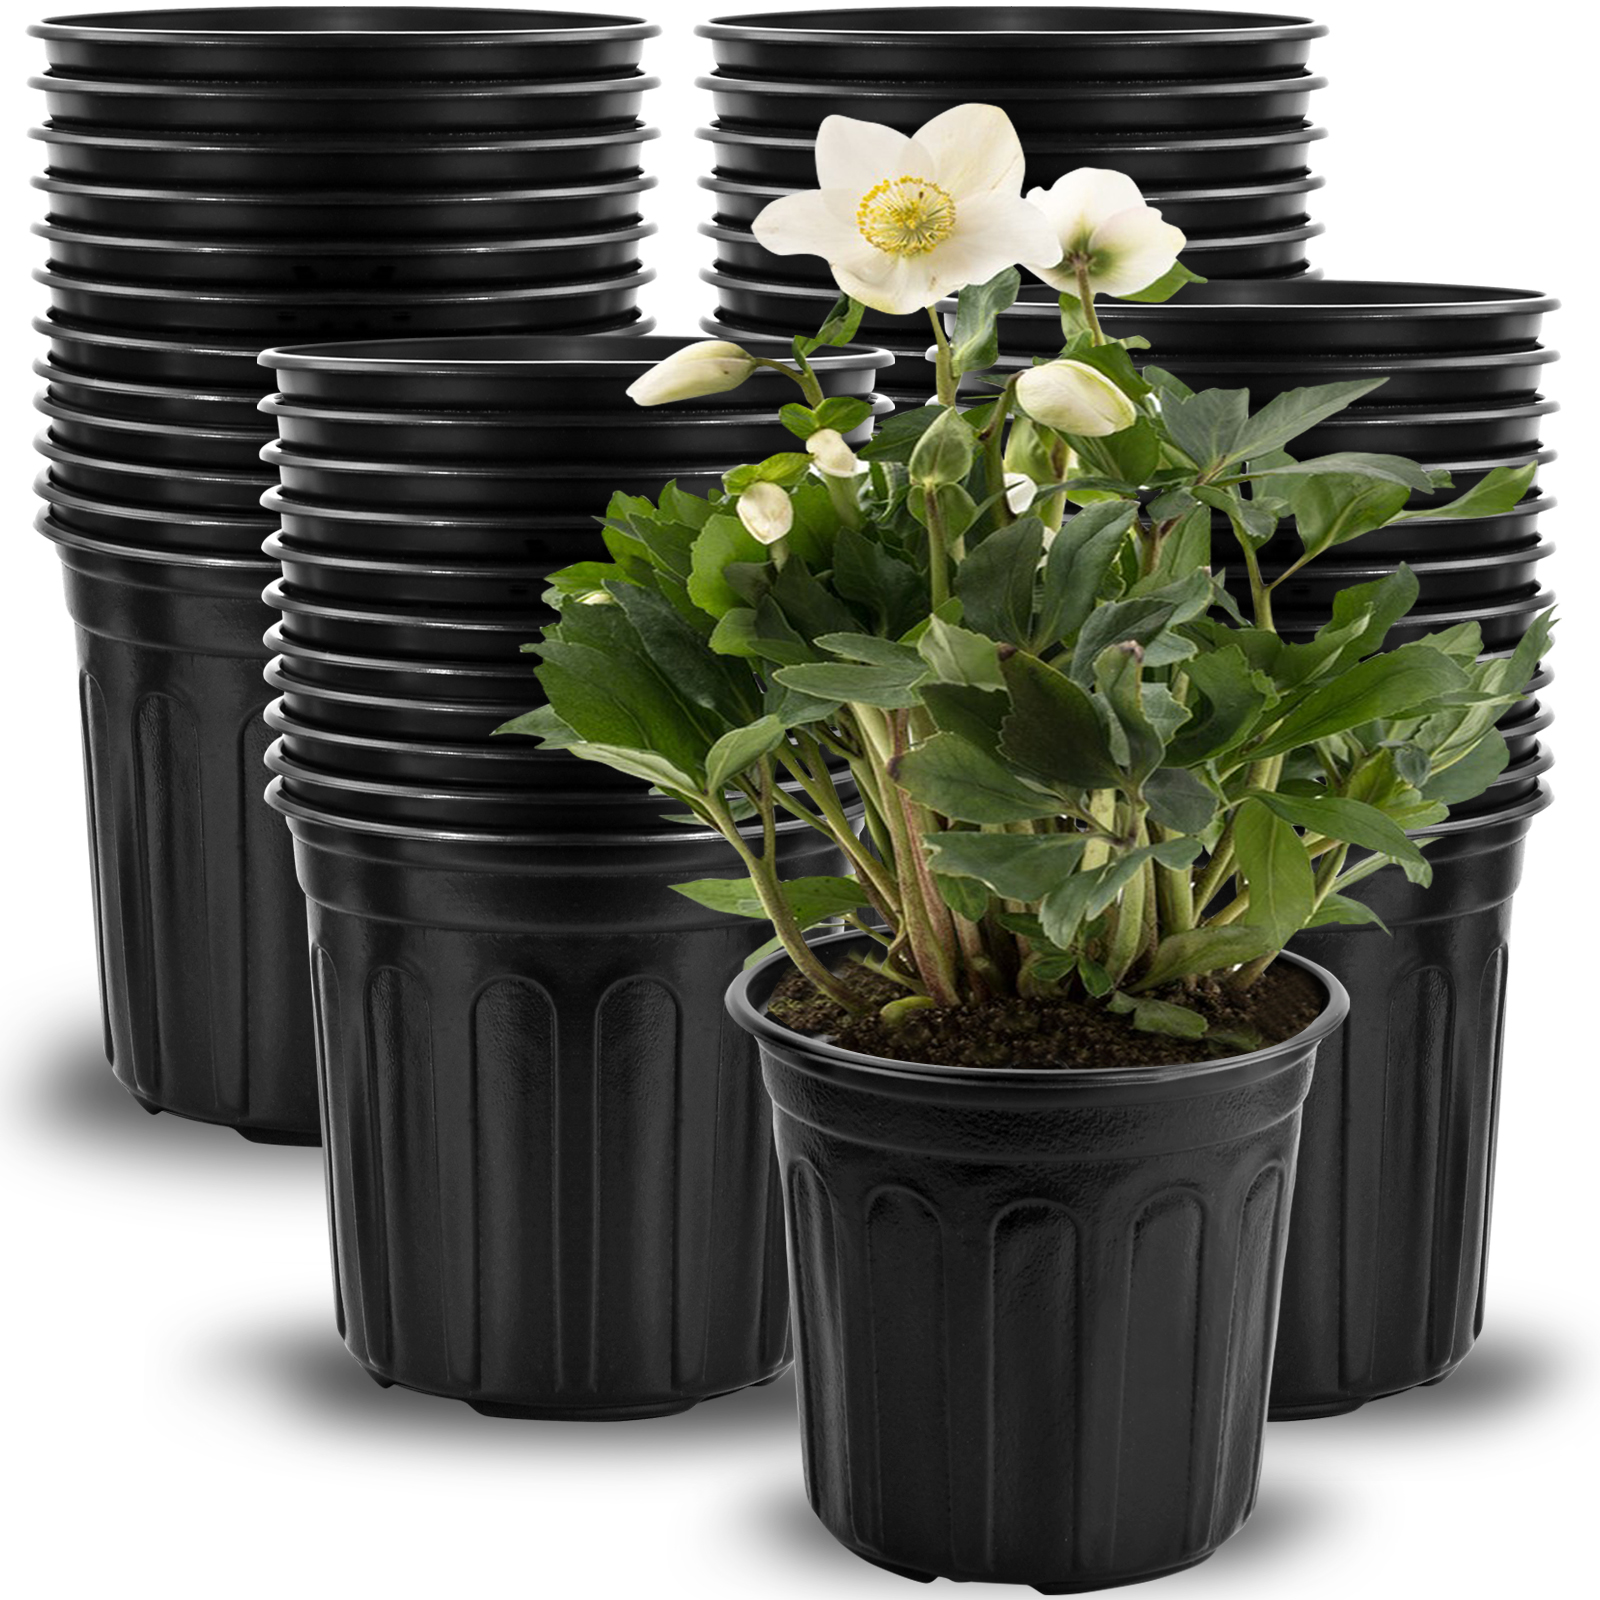 48 packs 1 gallon soft plant nursery pots thickened soft plastic nursery pots water permeable and breathable black